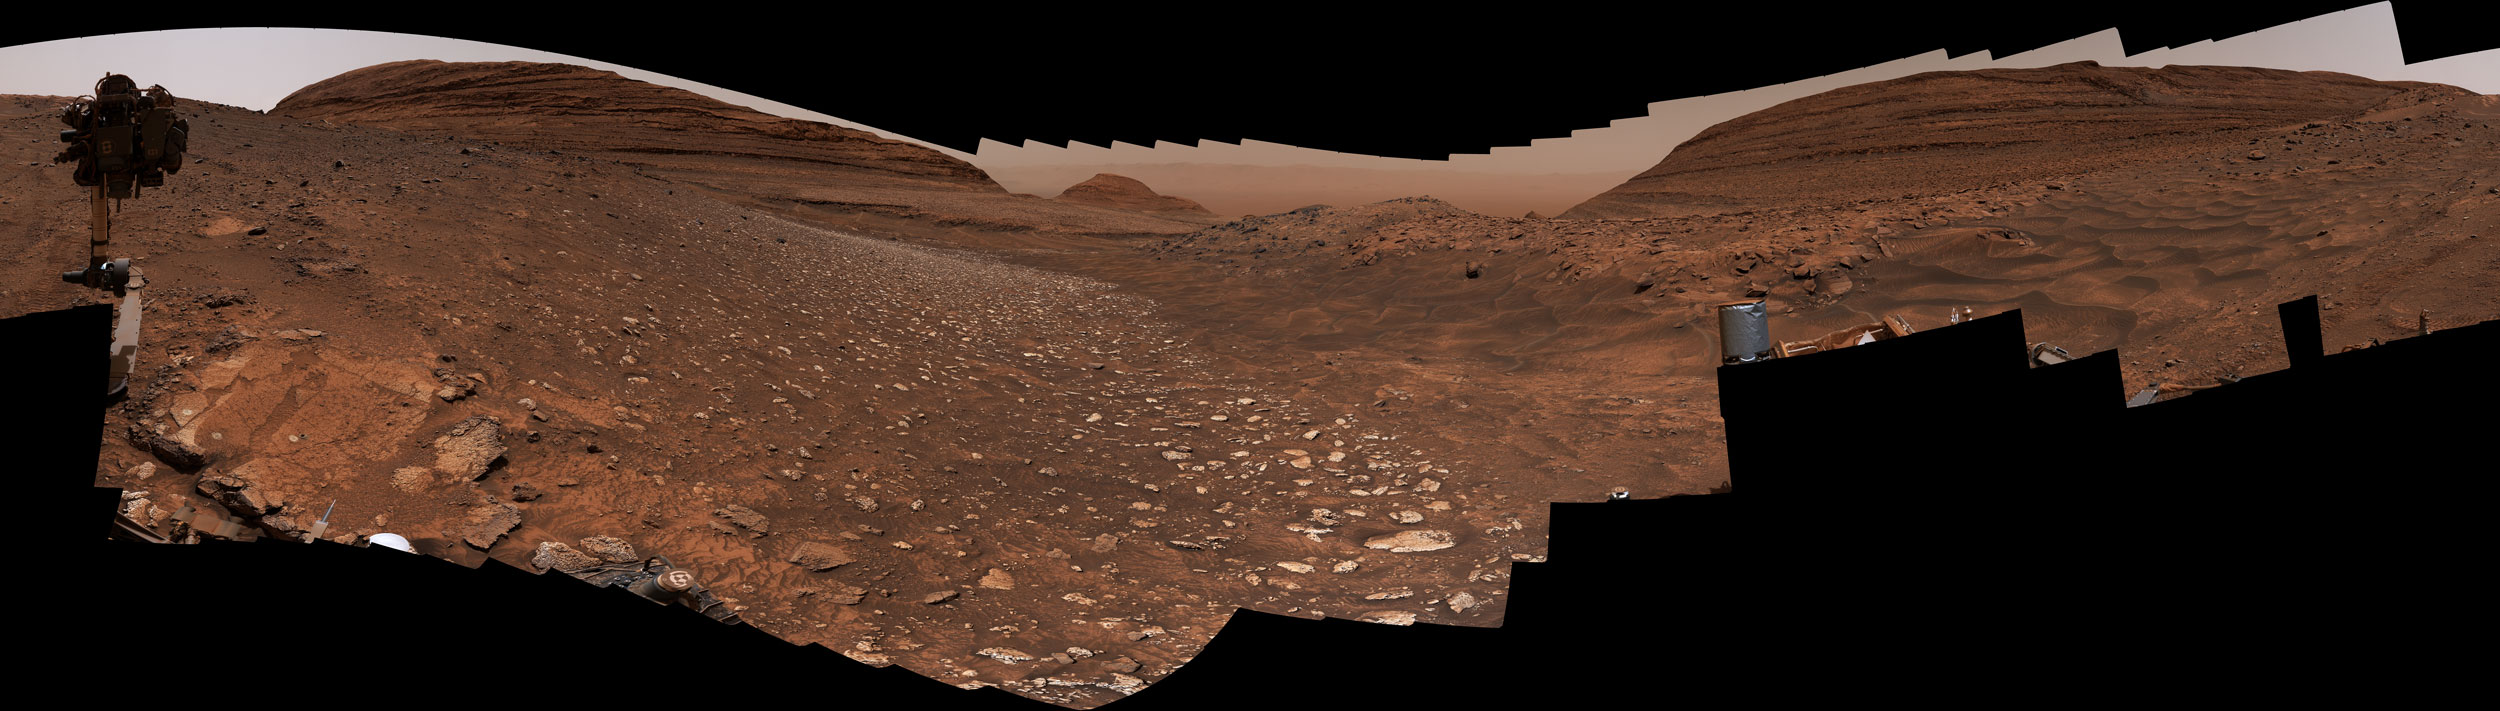 NASA’s Curiosity Mars rover used its Mast Camera, or Mastcam, to take this 360-degree panorama from within Gediz Vallis channel on June 19, 2024, the 4,220th Martian day, or sol, of the mission. The panorama is made up of 336 individual images that were stitched together after being sent back to Earth. The color has been adjusted to match lighting conditions as the human eye would see them on Earth.